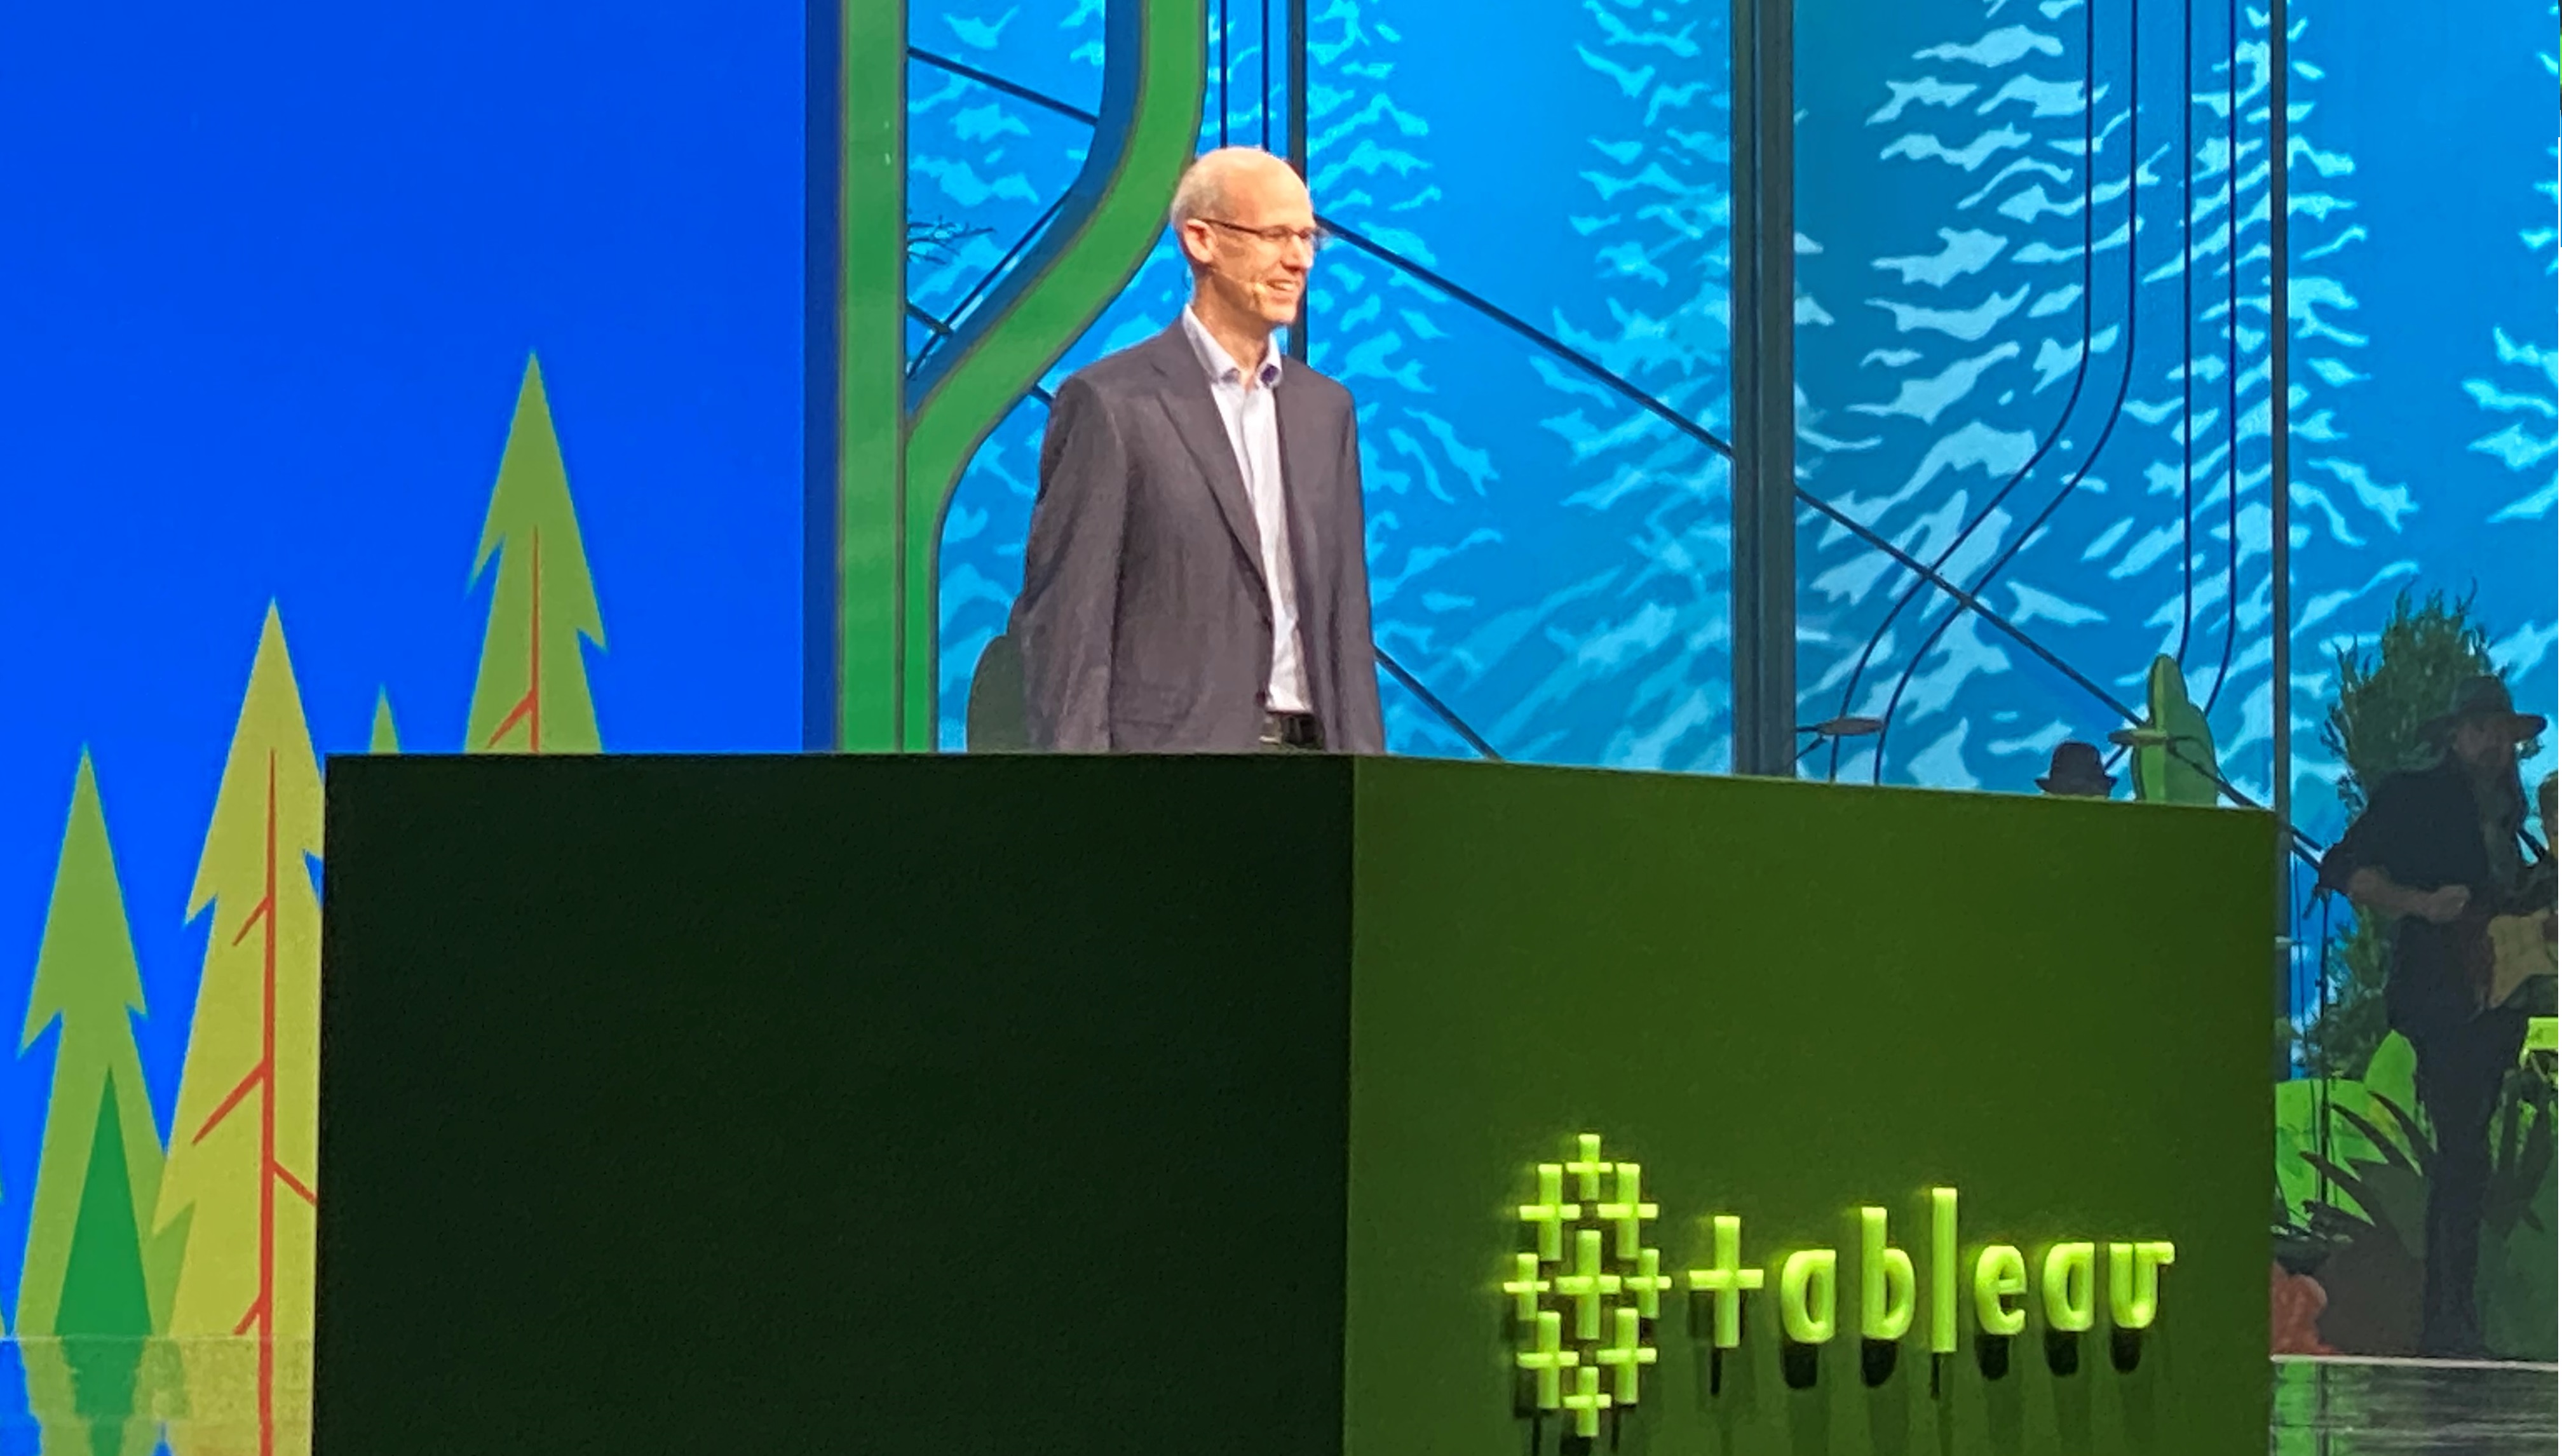 Tableau Gets Back on the Conference Circuit in a Time of Change